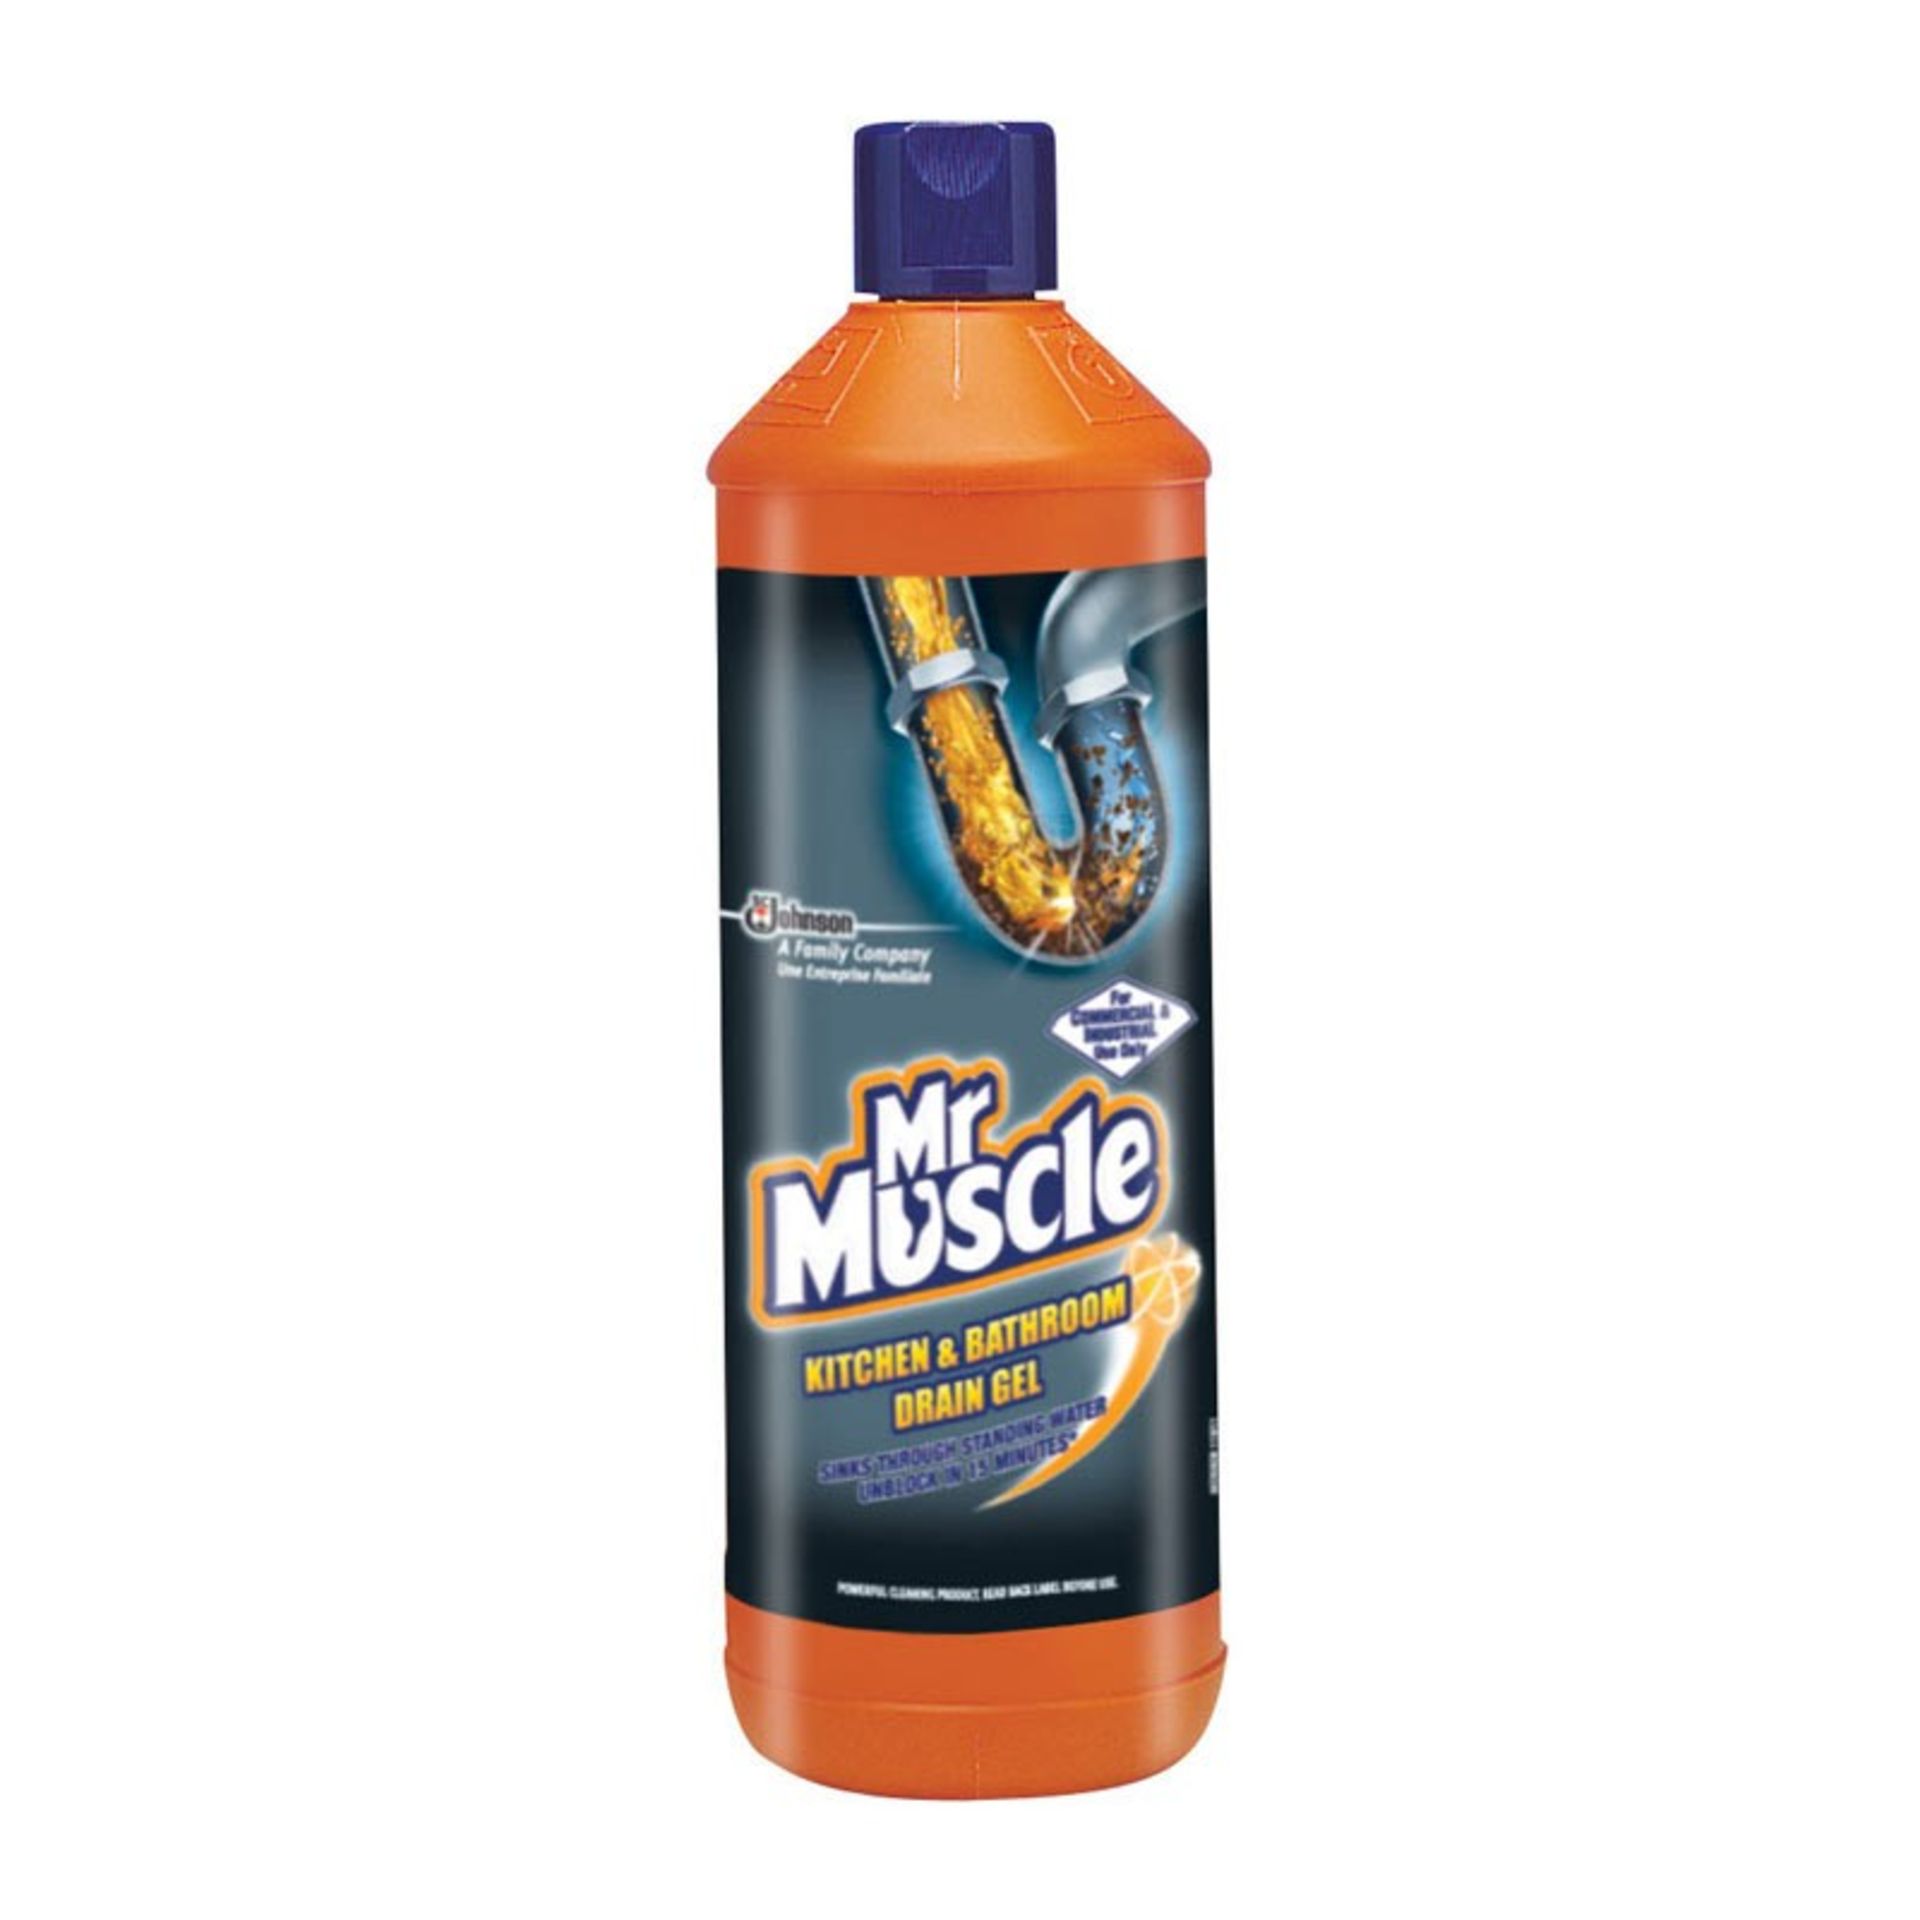 V *TRADE QTY* Brand New Mr Muscle Kitchen & Bathroom Drain Gel - Unblock In 15 Minutes - SRP £7.95 X